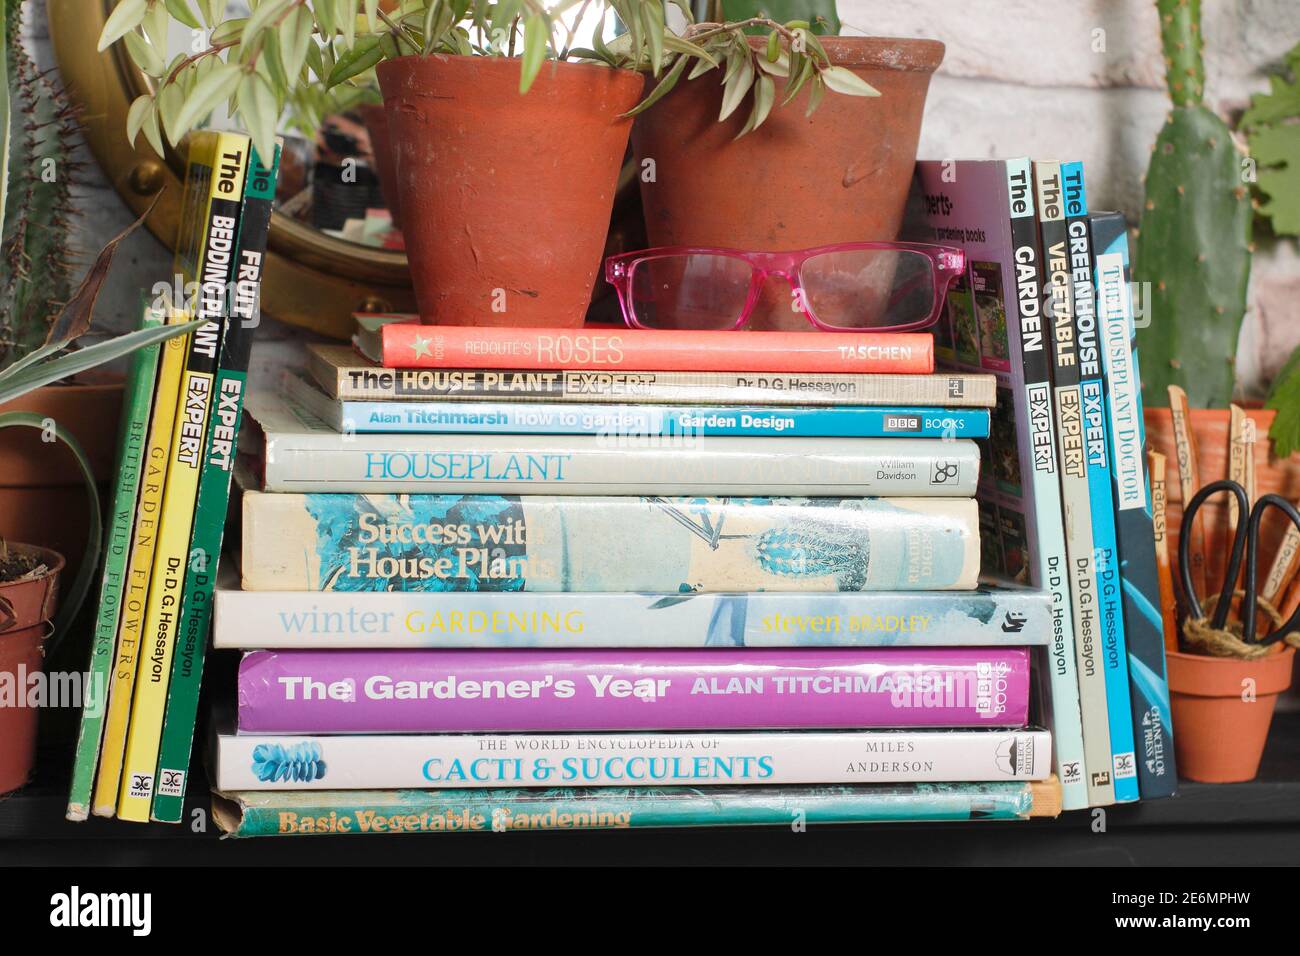 Stack of gardening books on a bookshelf with houseplants and reading glasses. UK Stock Photo